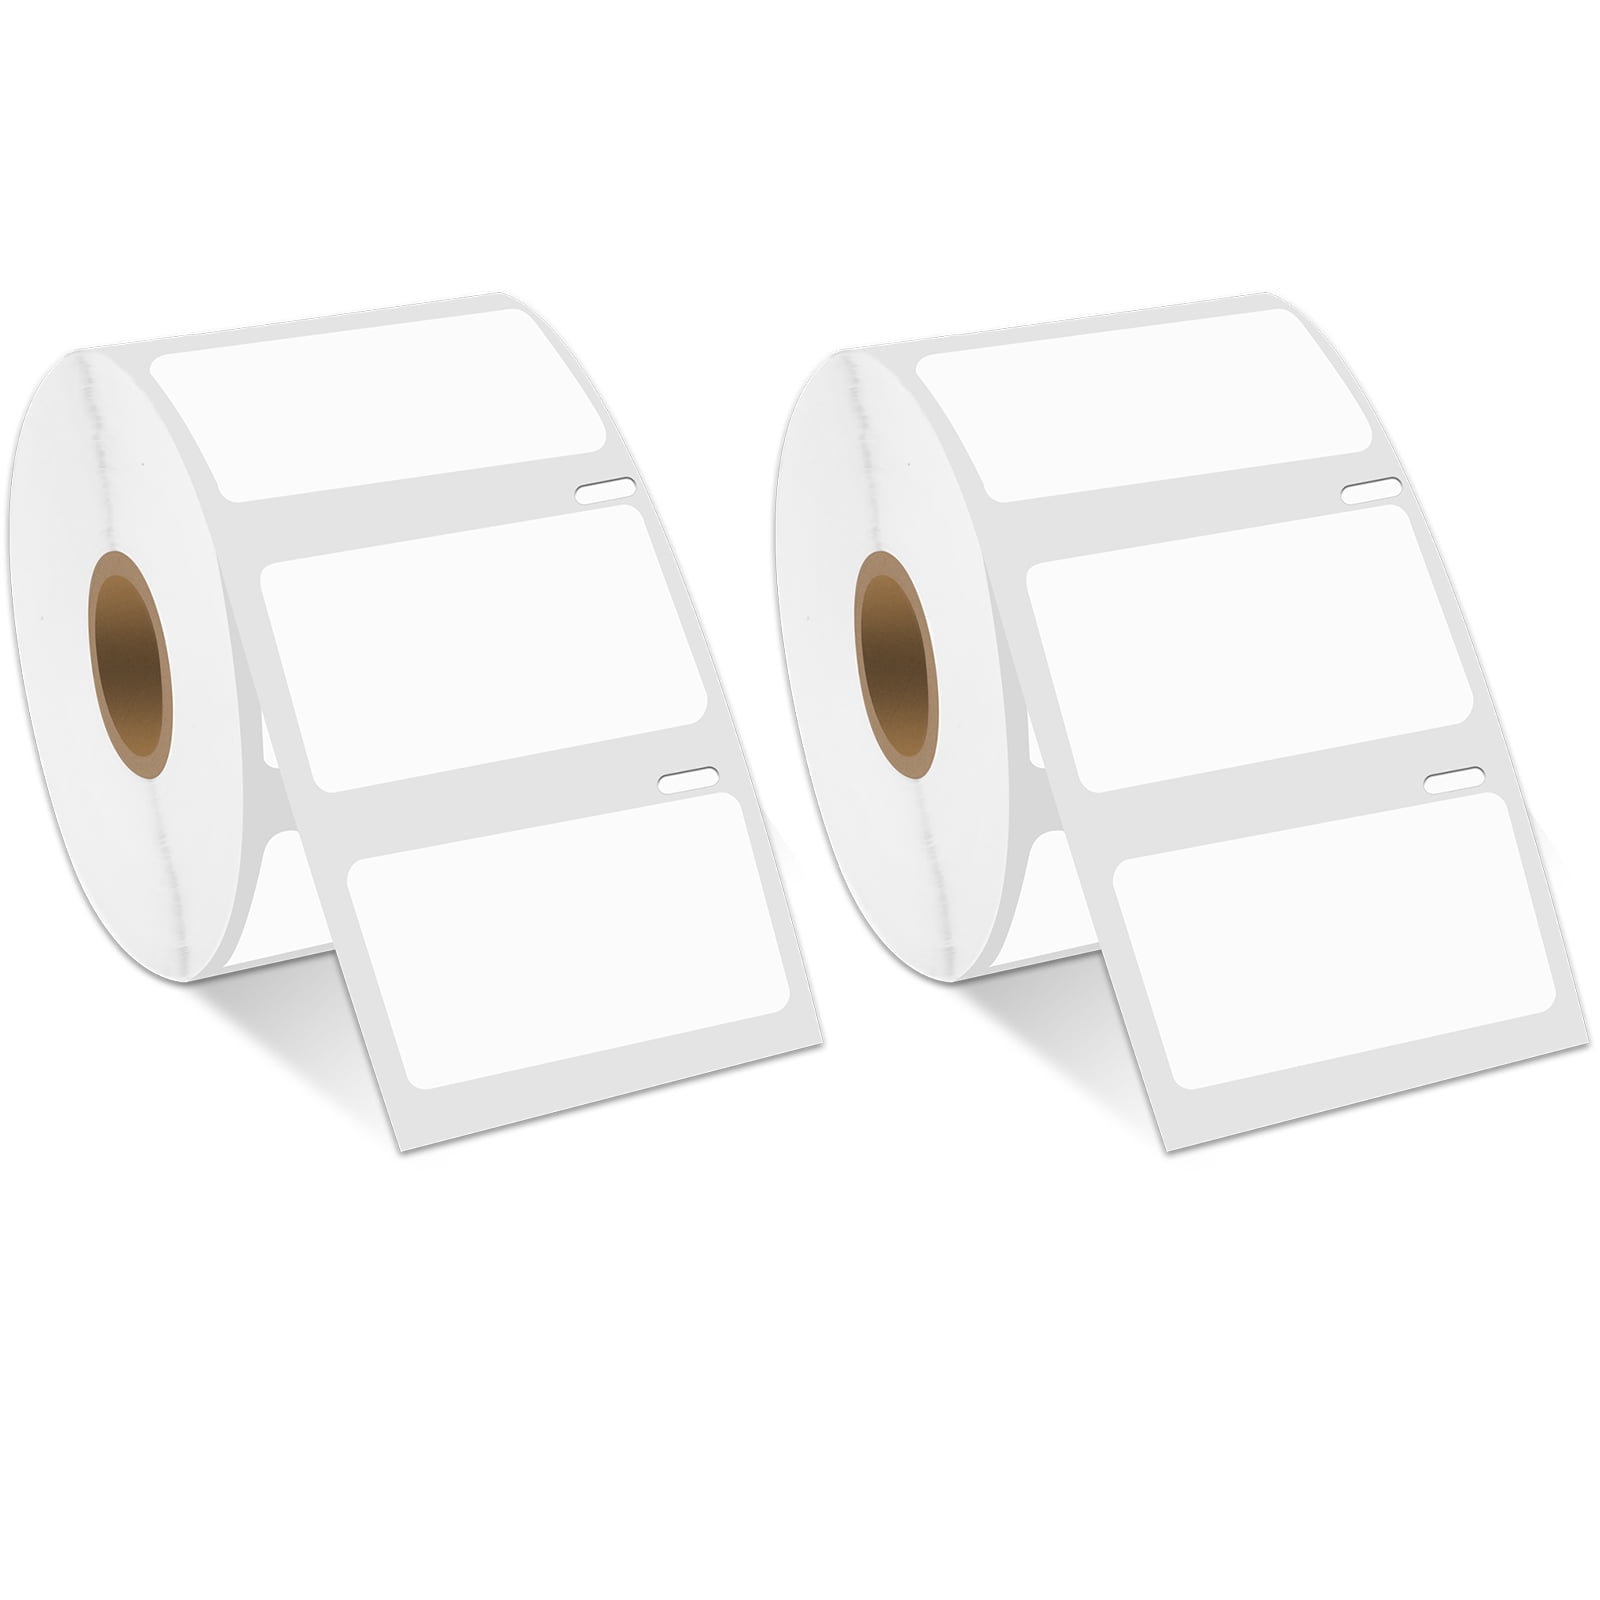 MarkDomain Compatible Paper Roll Replacement for Dymo 30323 (2-1/8 inch x 4 inch) Use with LabelWriter 4XL 450, 450 Duo/Turbo, Shipping Labels 8 Rolls